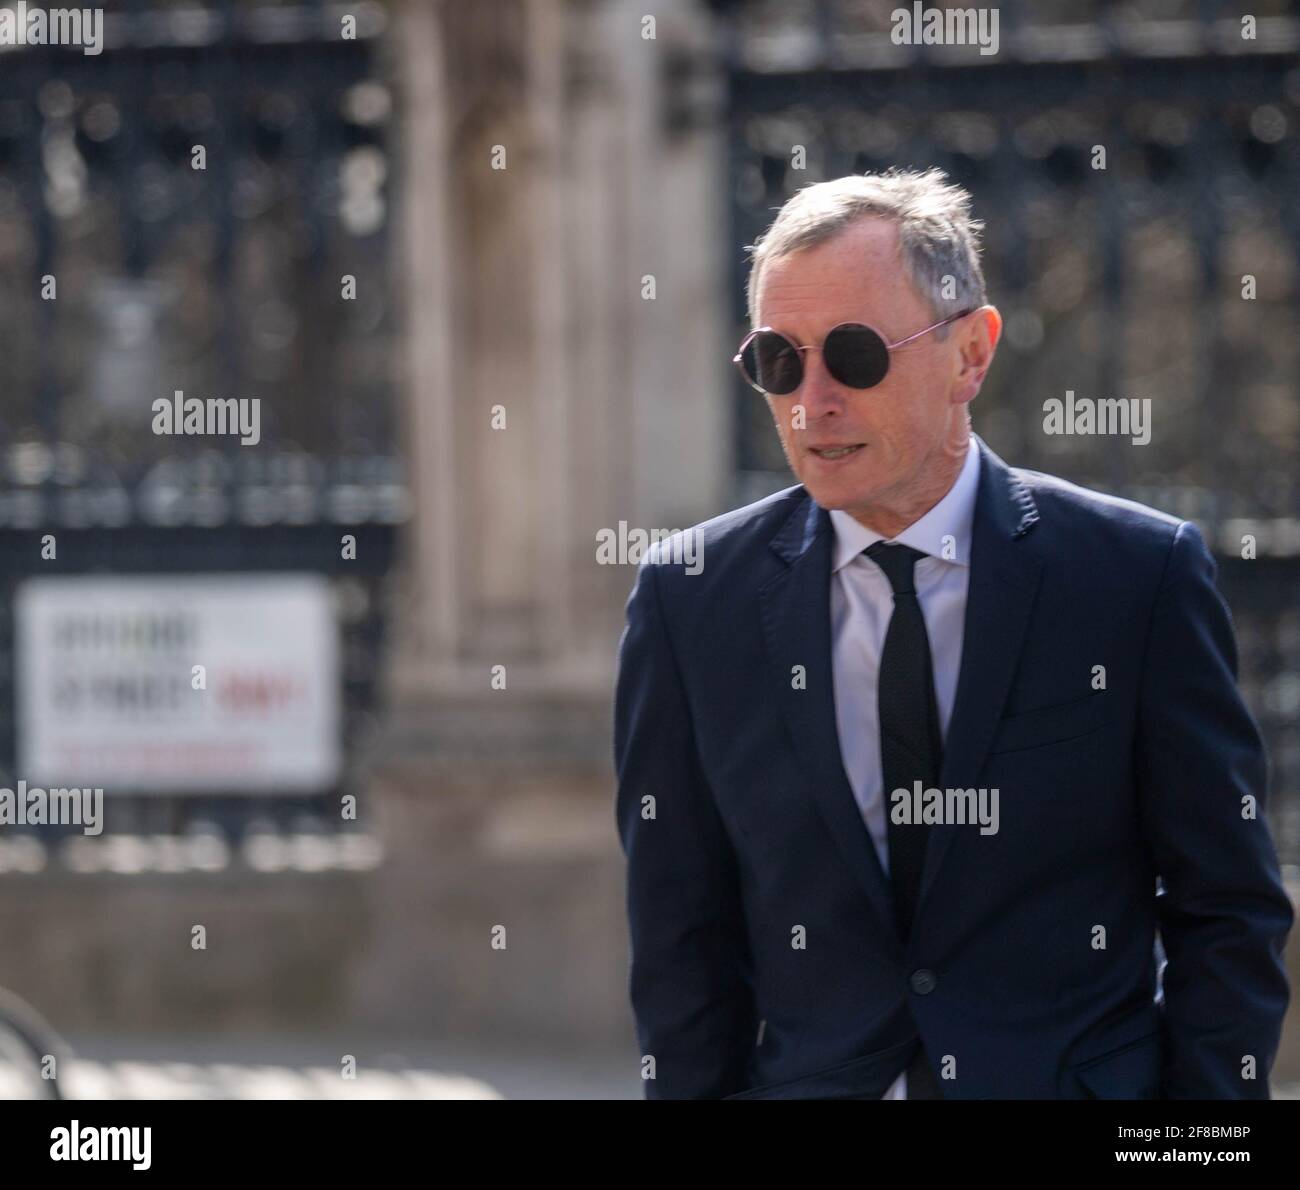 London, UK. 13th Apr, 2021. Nigel Evans Conservative MP for Ribble Valley outside the House of Commons Credit: Ian Davidson/Alamy Live News Stock Photo